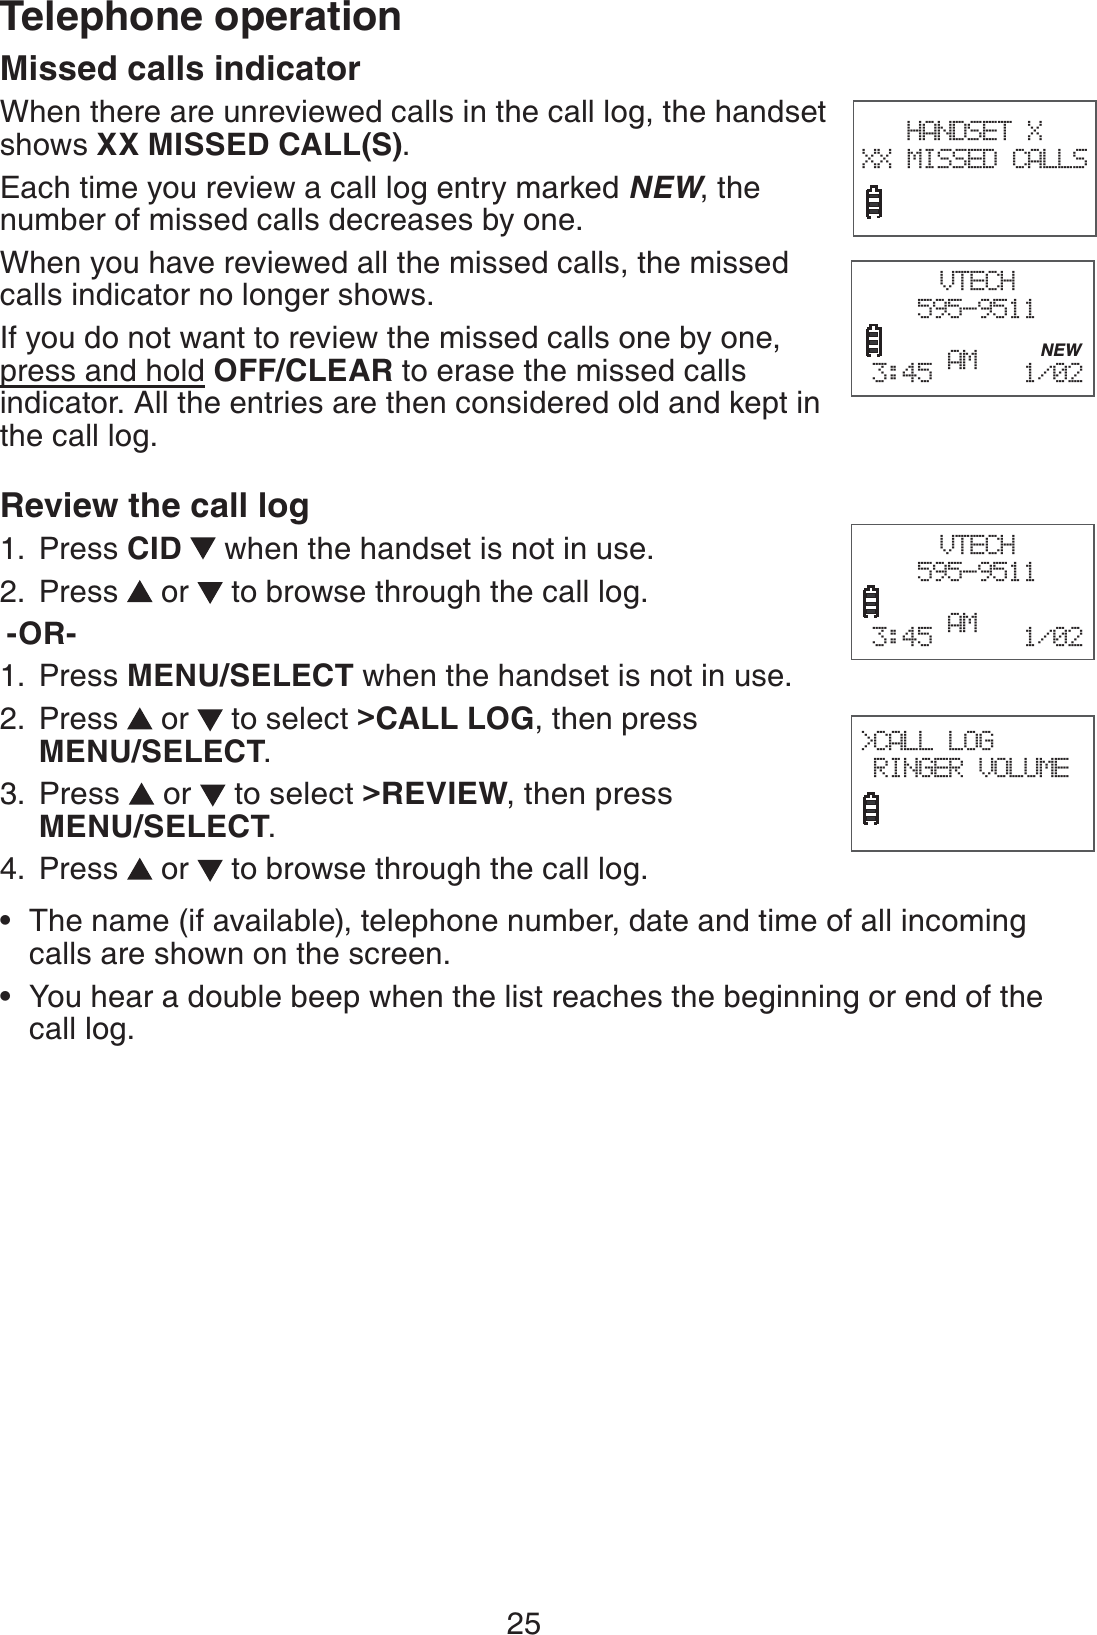 25Telephone operationMissed calls indicator When there are unreviewed calls in the call log, the handset shows XX MISSED CALL(S).Each time you review a call log entry marked NEW, the number of missed calls decreases by one.When you have reviewed all the missed calls, the missed calls indicator no longer shows.If you do not want to review the missed calls one by one, press and hold OFF/CLEAR to erase the missed calls indicator. All the entries are then considered old and kept in the call log. Review the call log Press CID   when the handset is not in use.Press   or   to browse through the call log. -OR-Press MENU/SELECT when the handset is not in use.Press   or   to select &gt;CALL LOG, then press  MENU/SELECT.Press   or   to select &gt;REVIEW, then press  MENU/SELECT.Press   or   to browse through the call log.The name (if available), telephone number, date and time of all incoming calls are shown on the screen.You hear a double beep when the list reaches the beginning or end of the call log.1.2.1.2.3.4.••HANDSET X XX MISSED CALLSVTECH595-9511           NEW3:45 AM   1/02  VTECH595-9511        3:45 AM   1/02  &gt;CALL LOG RINGER VOLUME